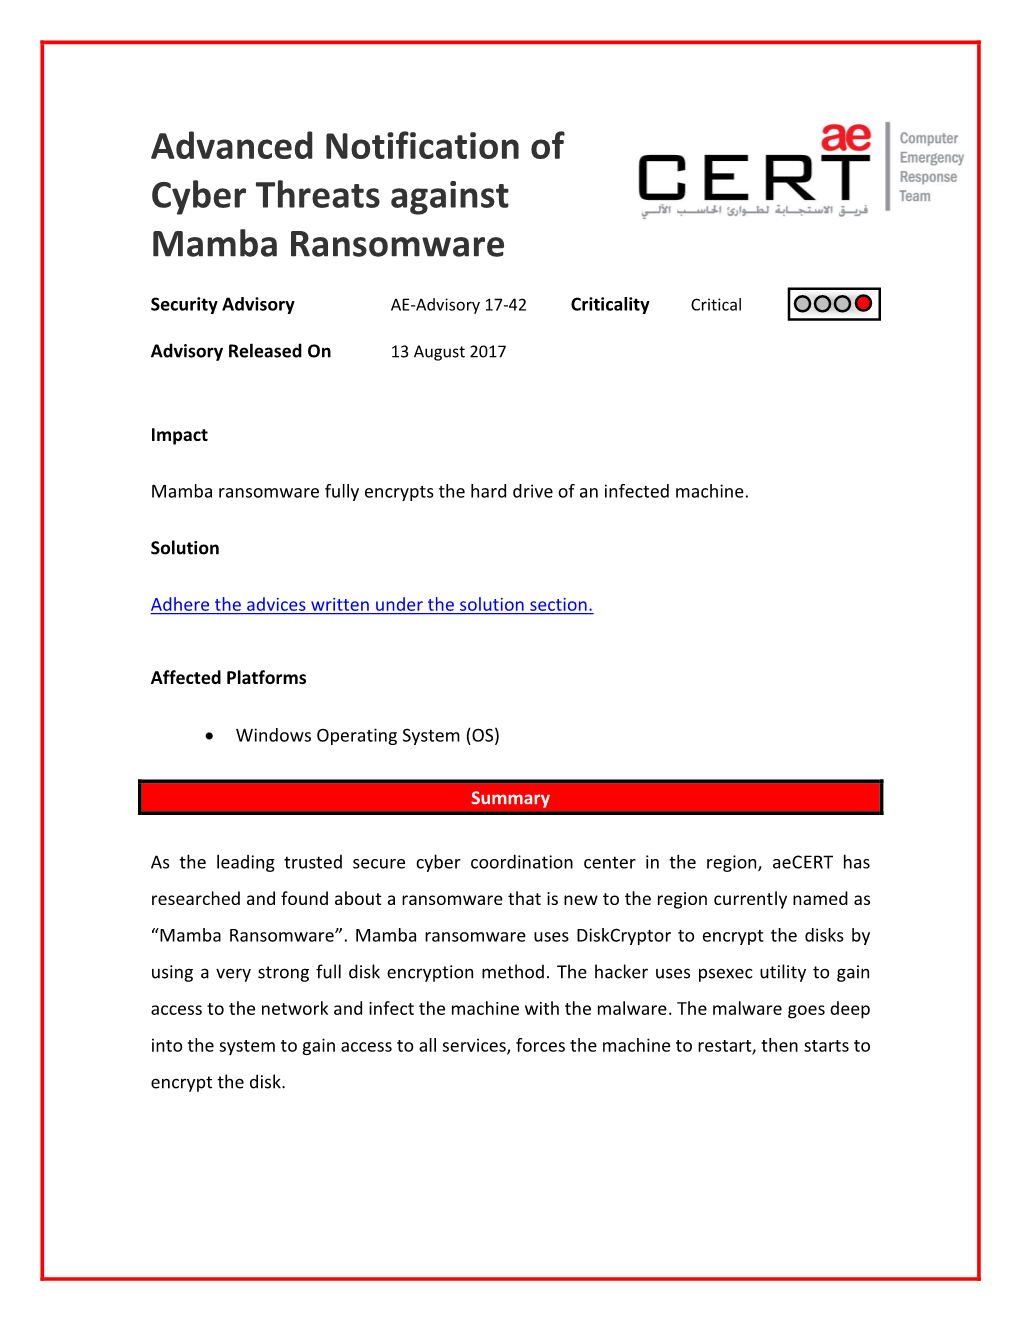 Advanced Notification of Cyber Threats Against Mamba Ransomware